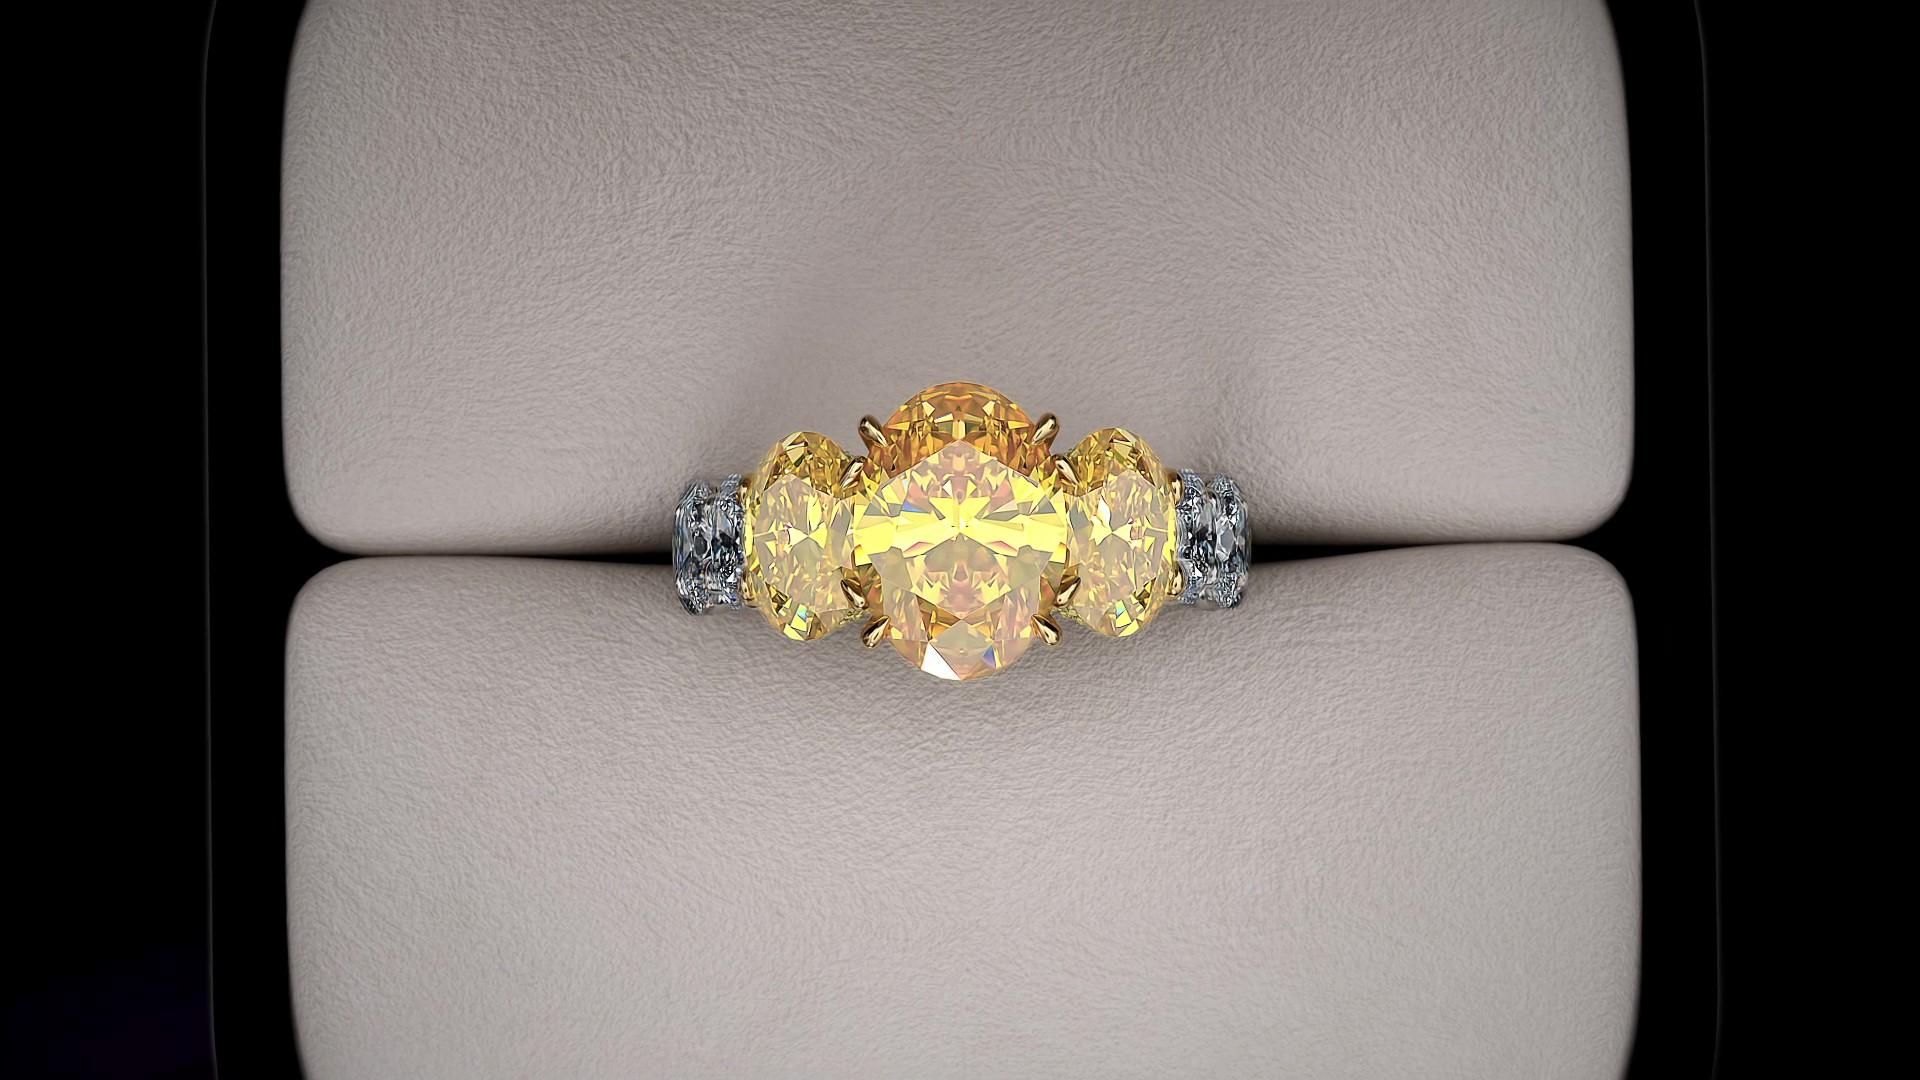 GIA Certified 5.04 carat total of Vivid Yellow Intense Oval diamonds, clarity ranging between VVS and VS, rich yellow color, no fluorescence, five graduated diamonds, made in 18k yellow gold and platinum, and approximately 3.6 carat white Oval